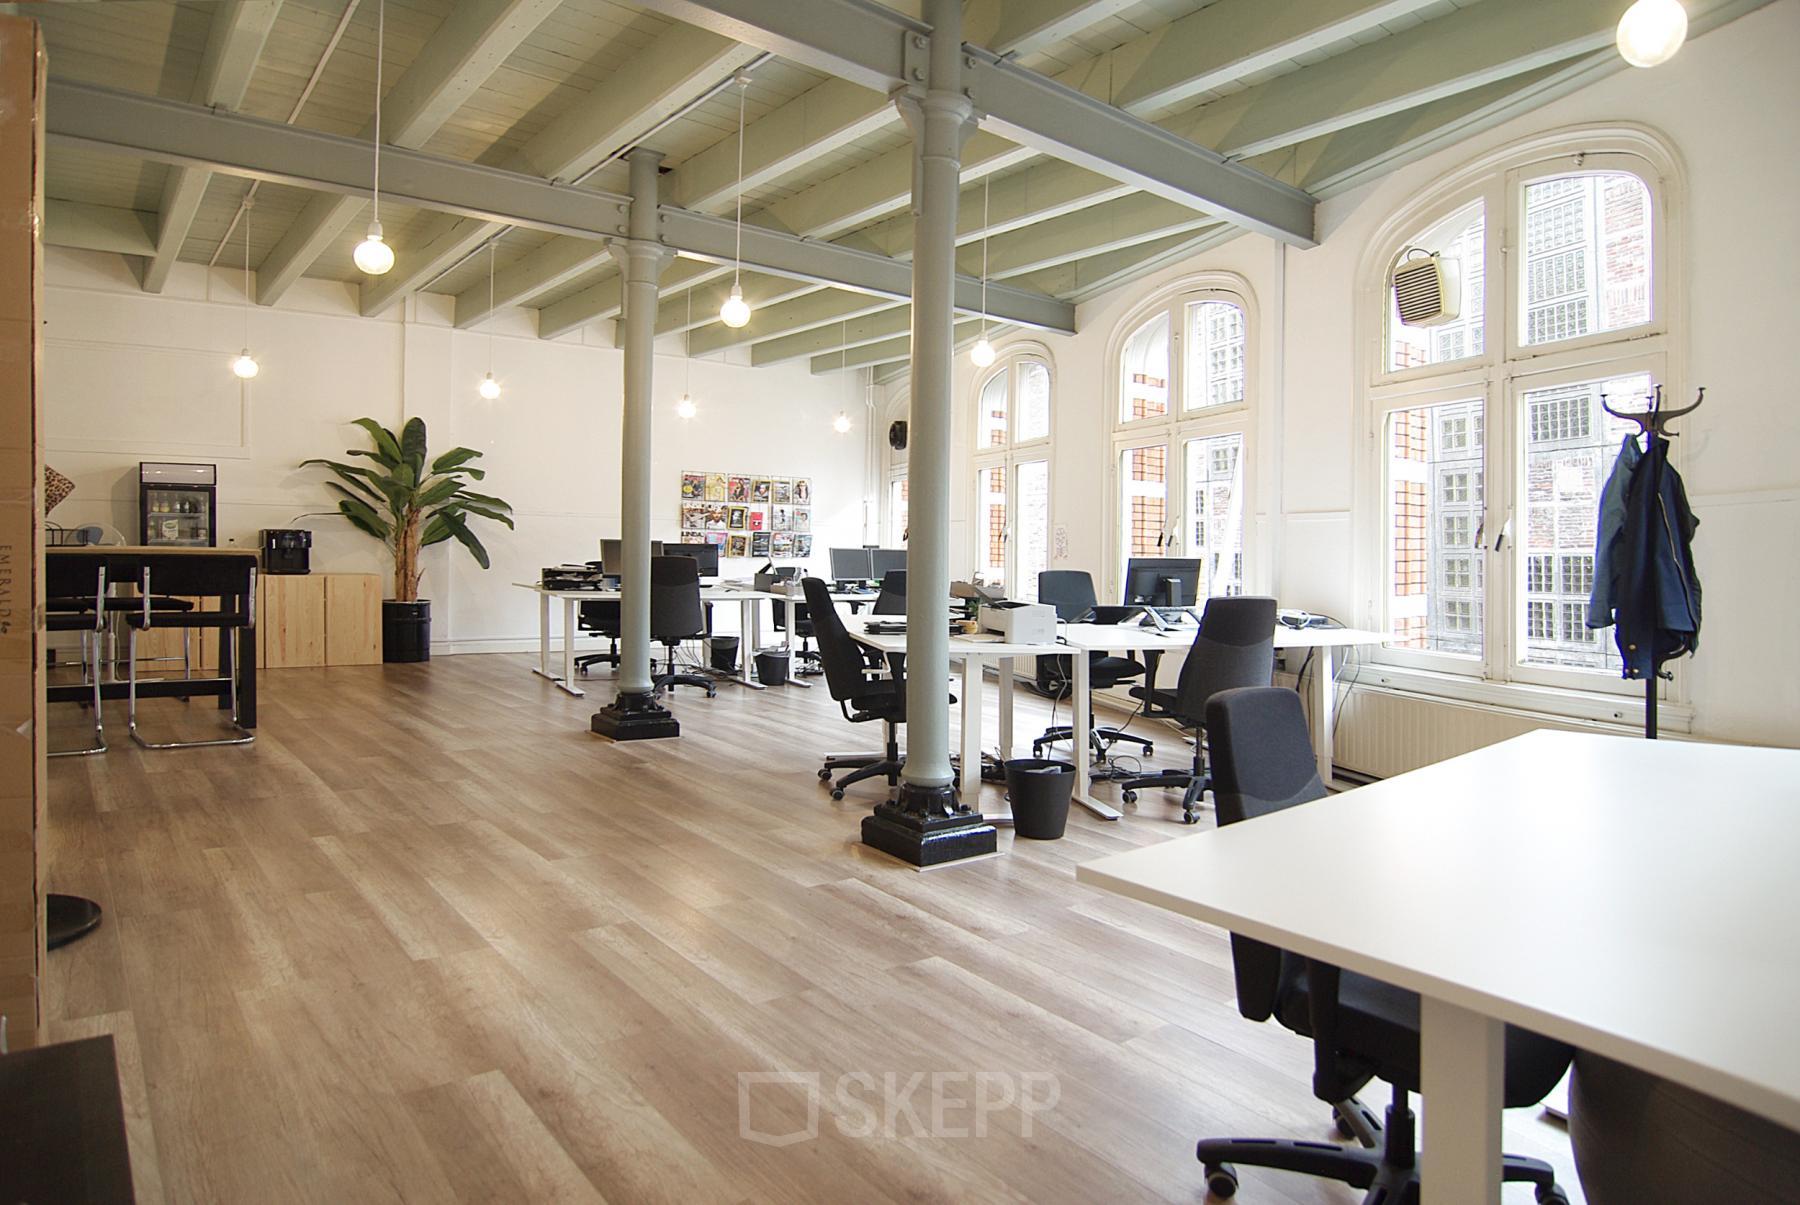 Spacious office space rental at Warmoesstraat 149-151 in Amsterdam Center with modern furniture and large windows.